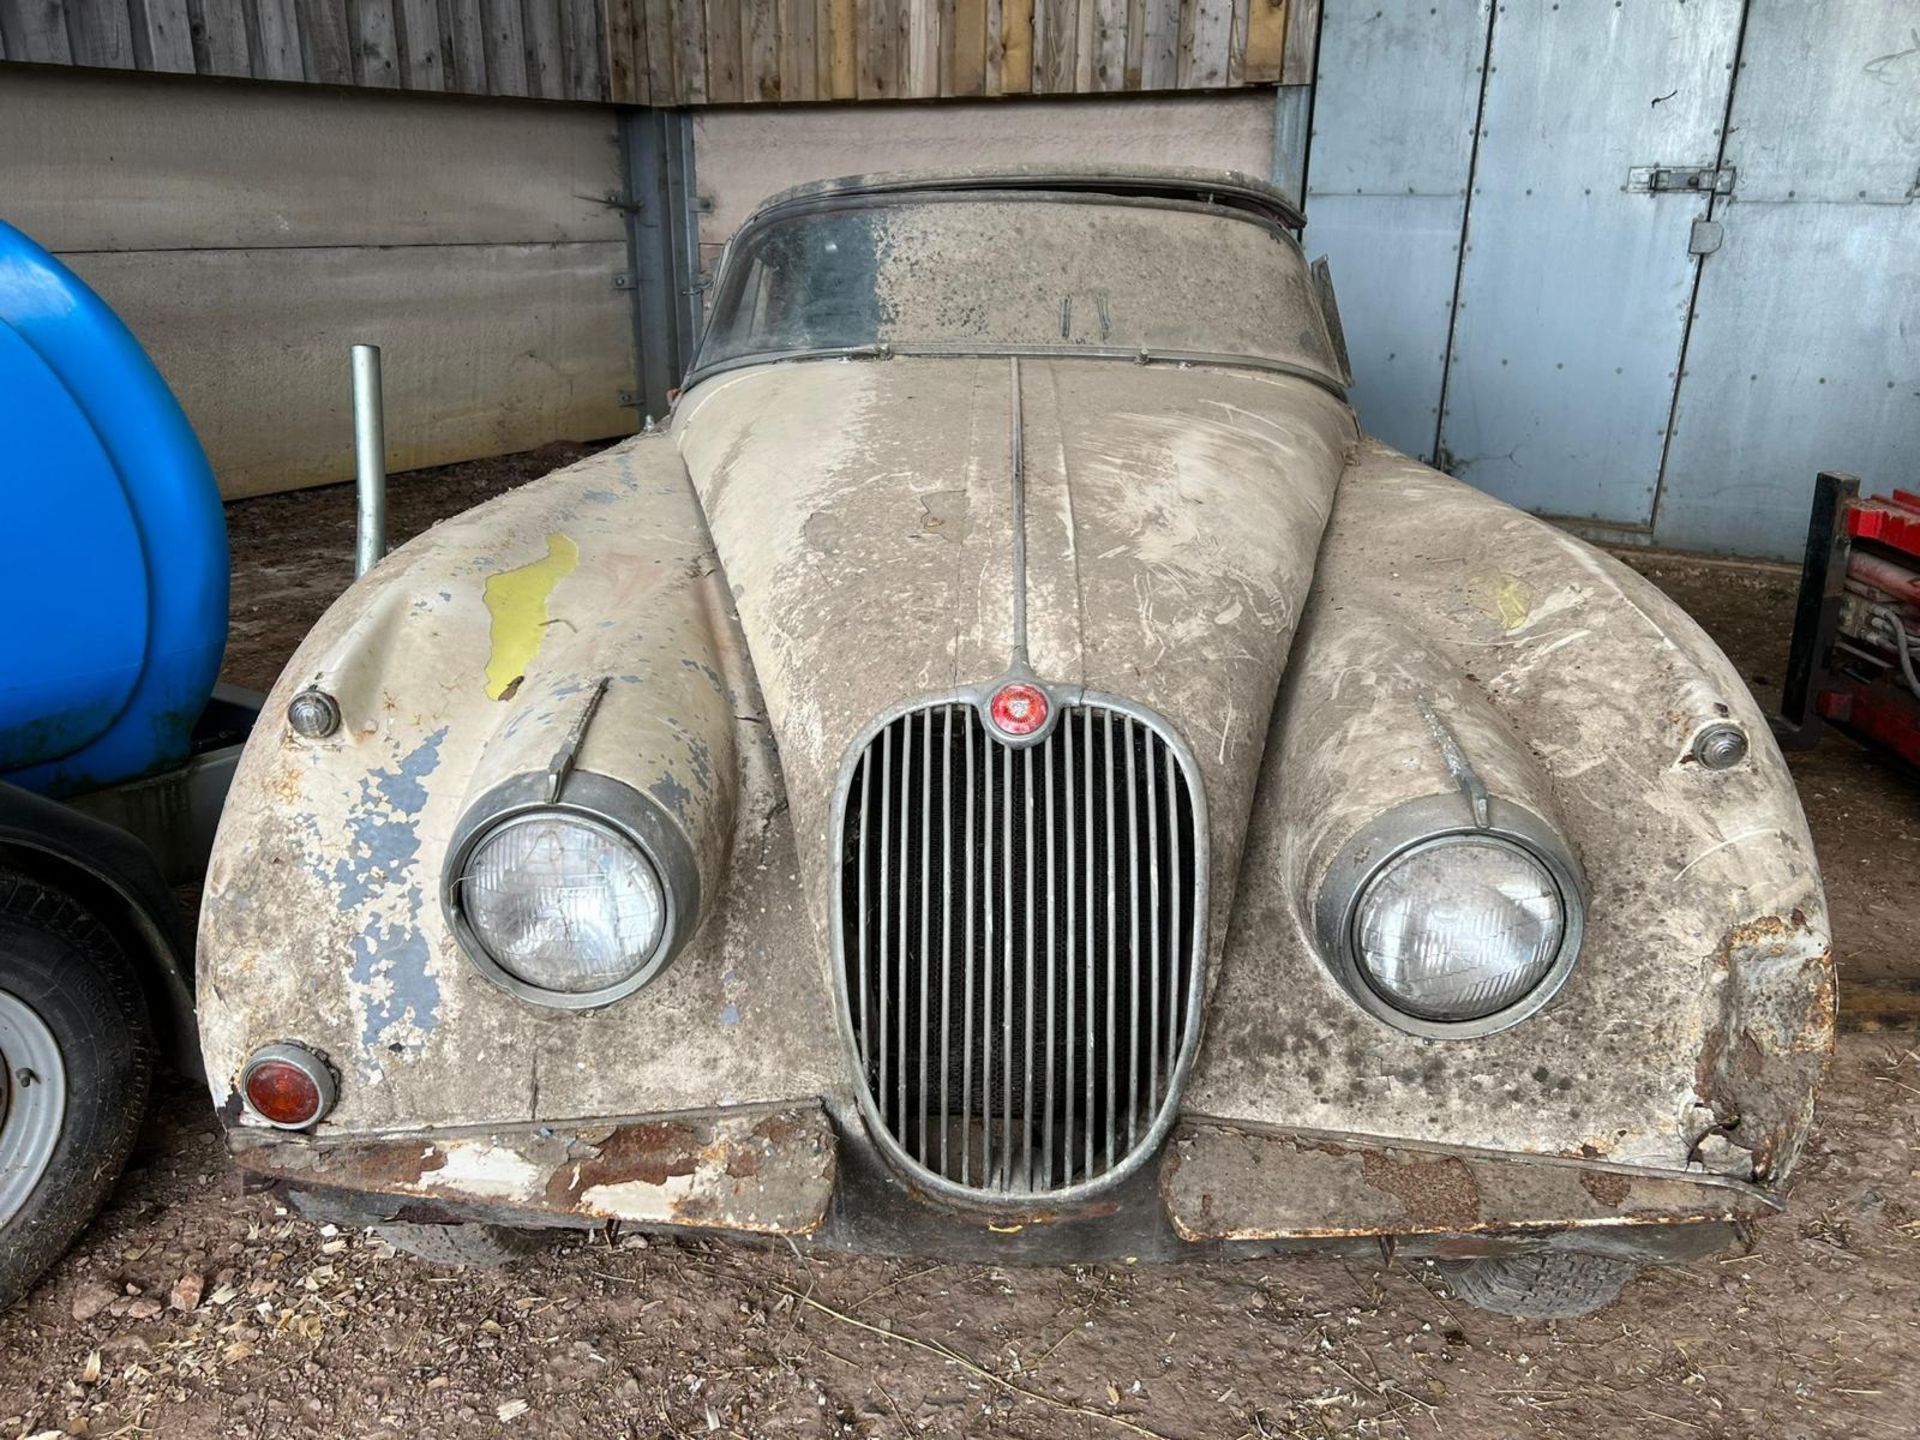 Jaguar XK150 3.4 Drop Head Coupe 1958 Barn Find. Matching numbers. - Image 3 of 27